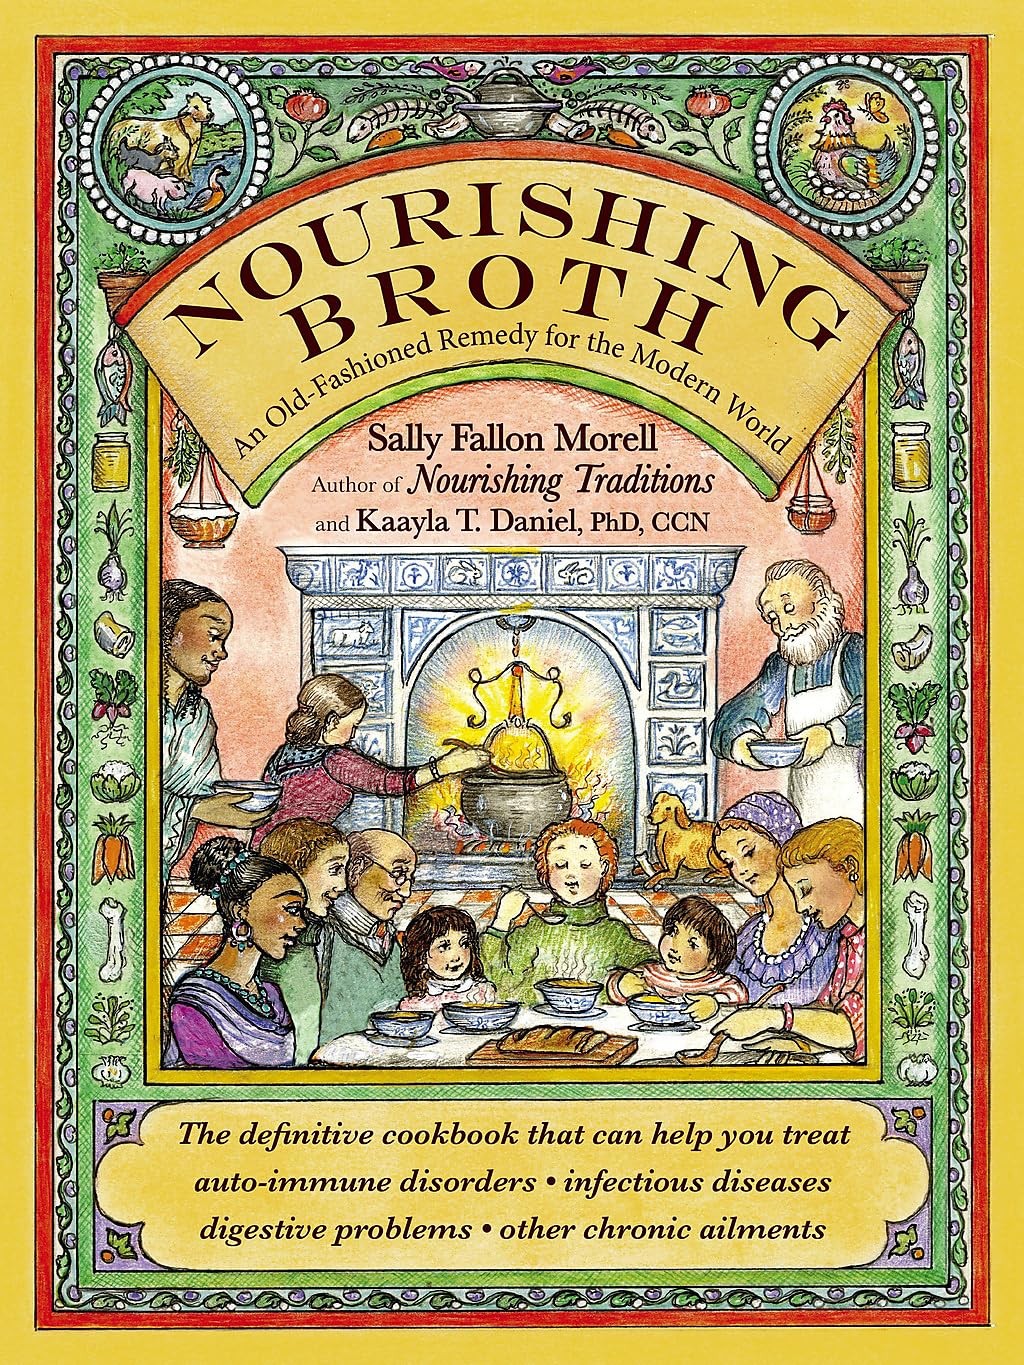 Nourishing Broth: An Old-Fashioned Remedy for the Modern World (Sally Fallon Morell)